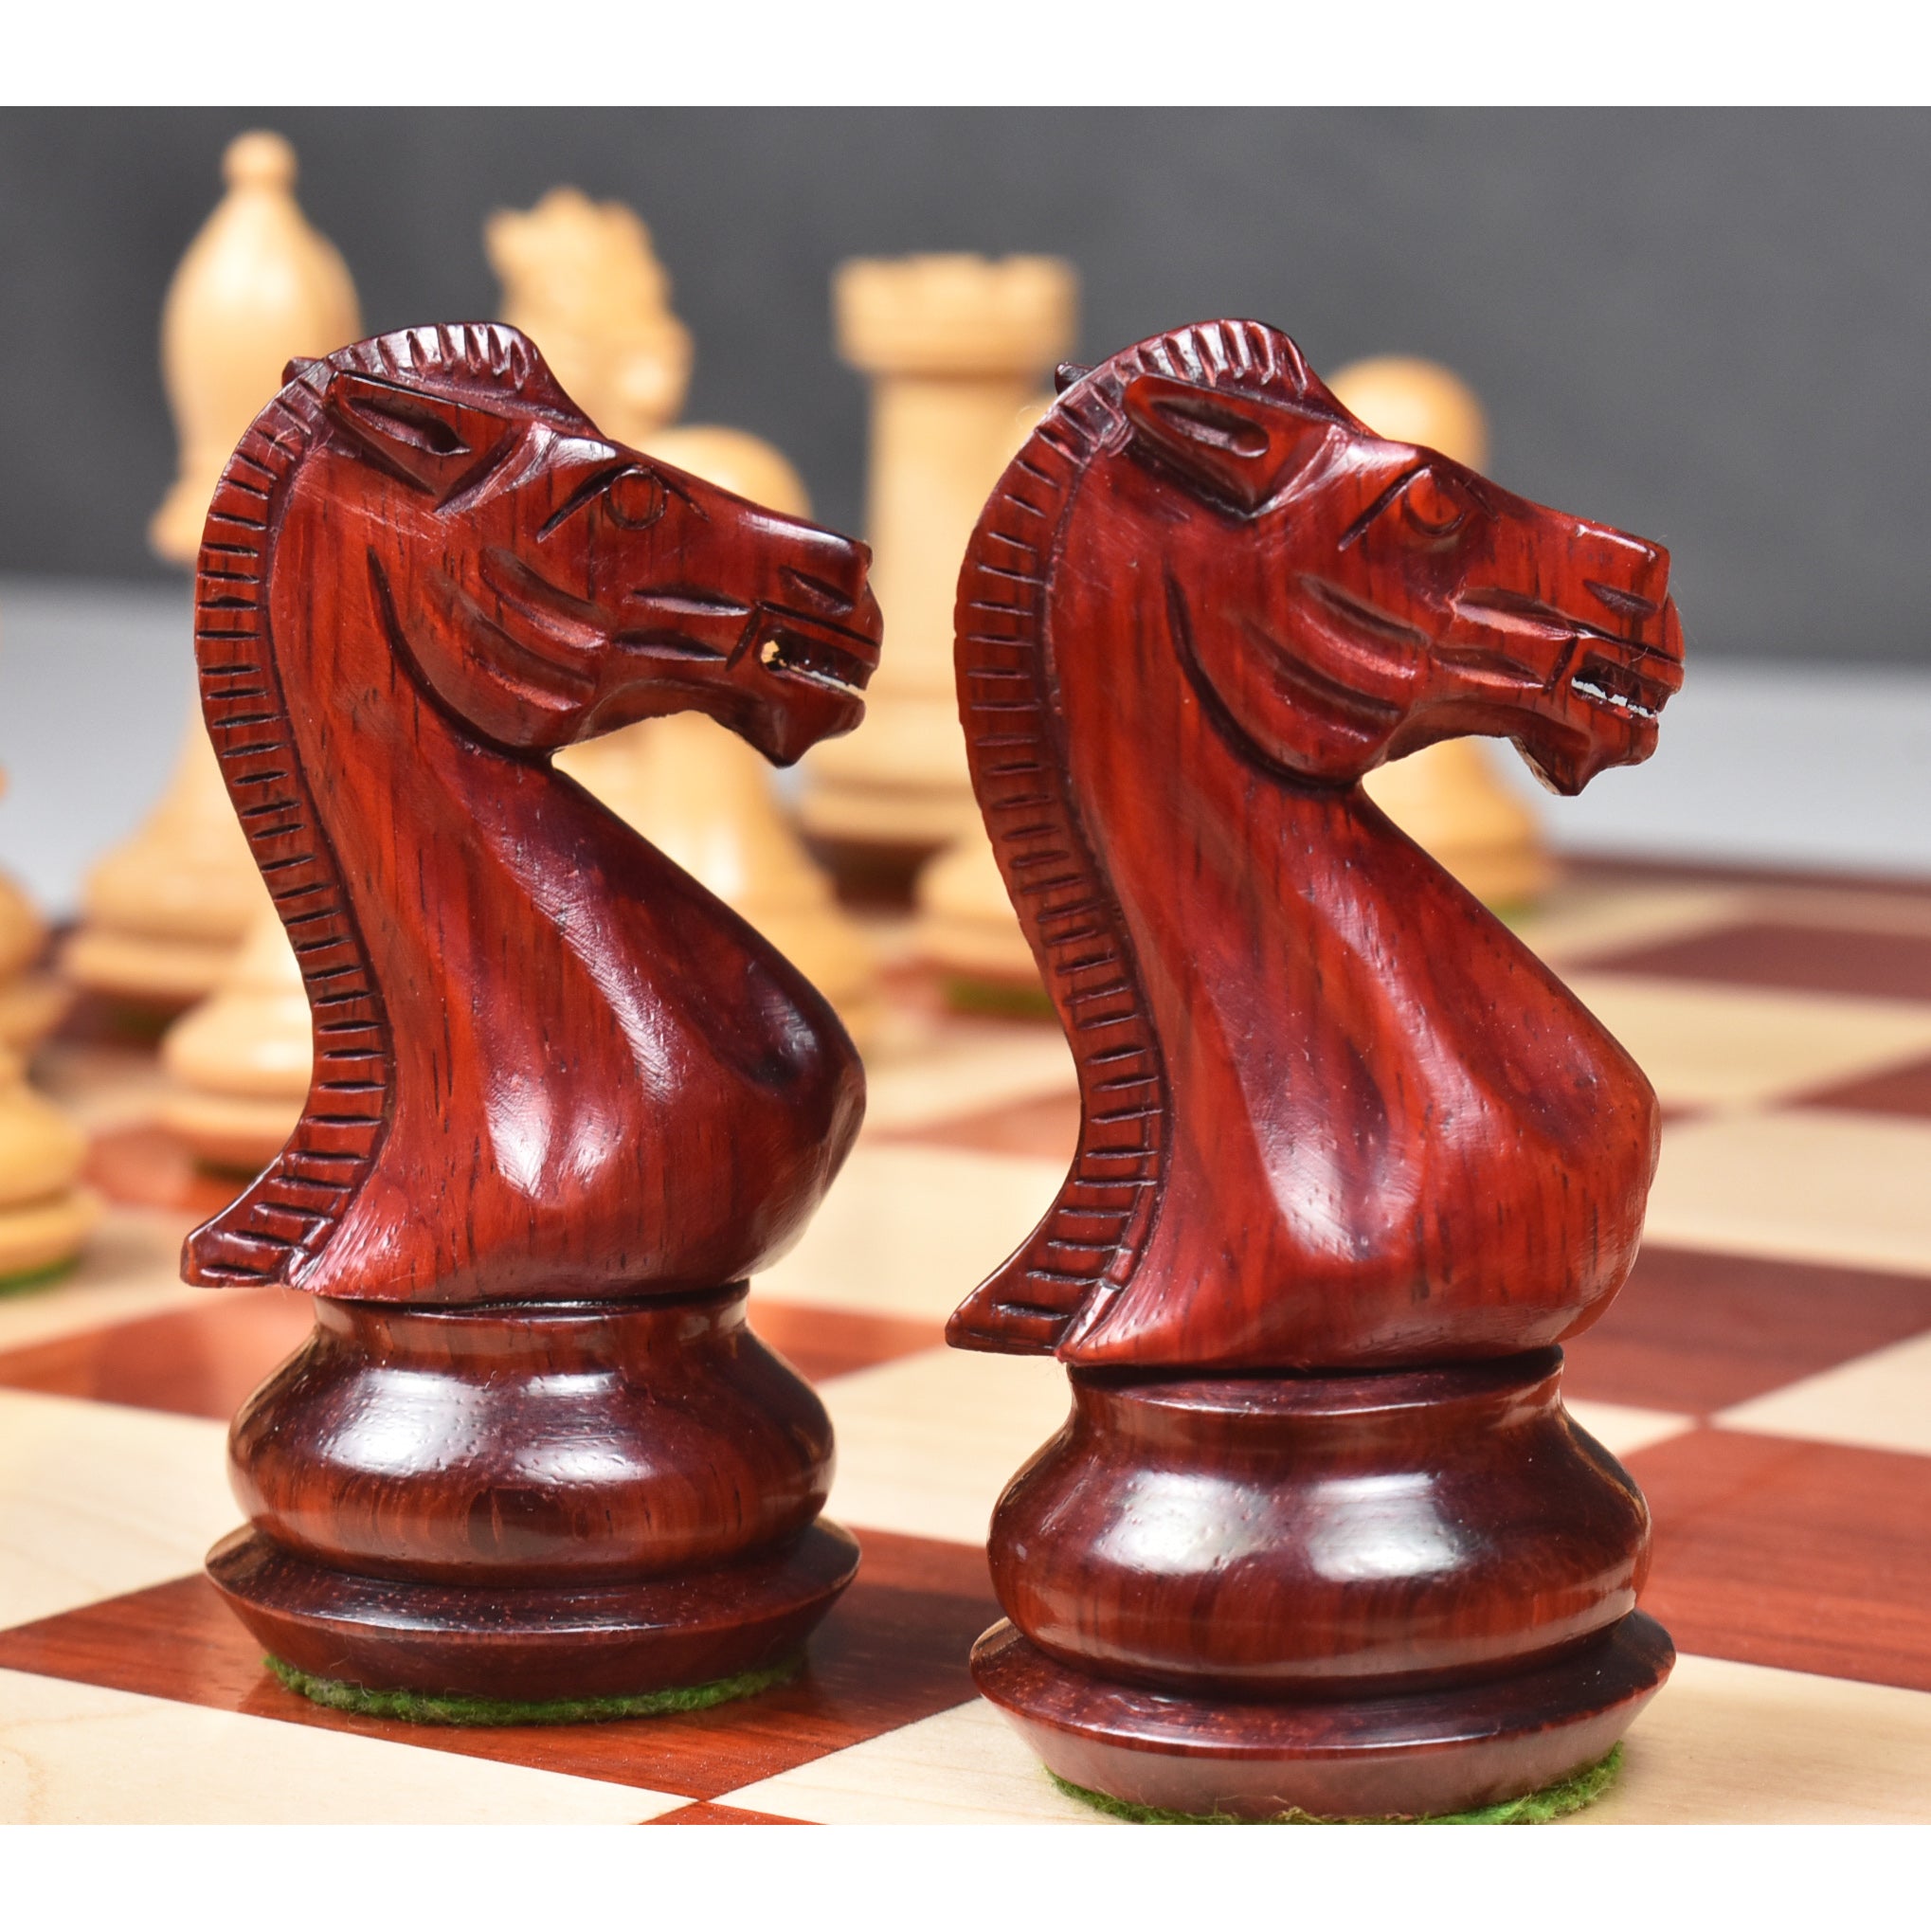 4.1" Chamfered Base Staunton Bud Rosewood Chess Pieces with 21" Bud Rosewood & Maple Wood Chess board and Golden Rosewood Chess Pieces Storage Box